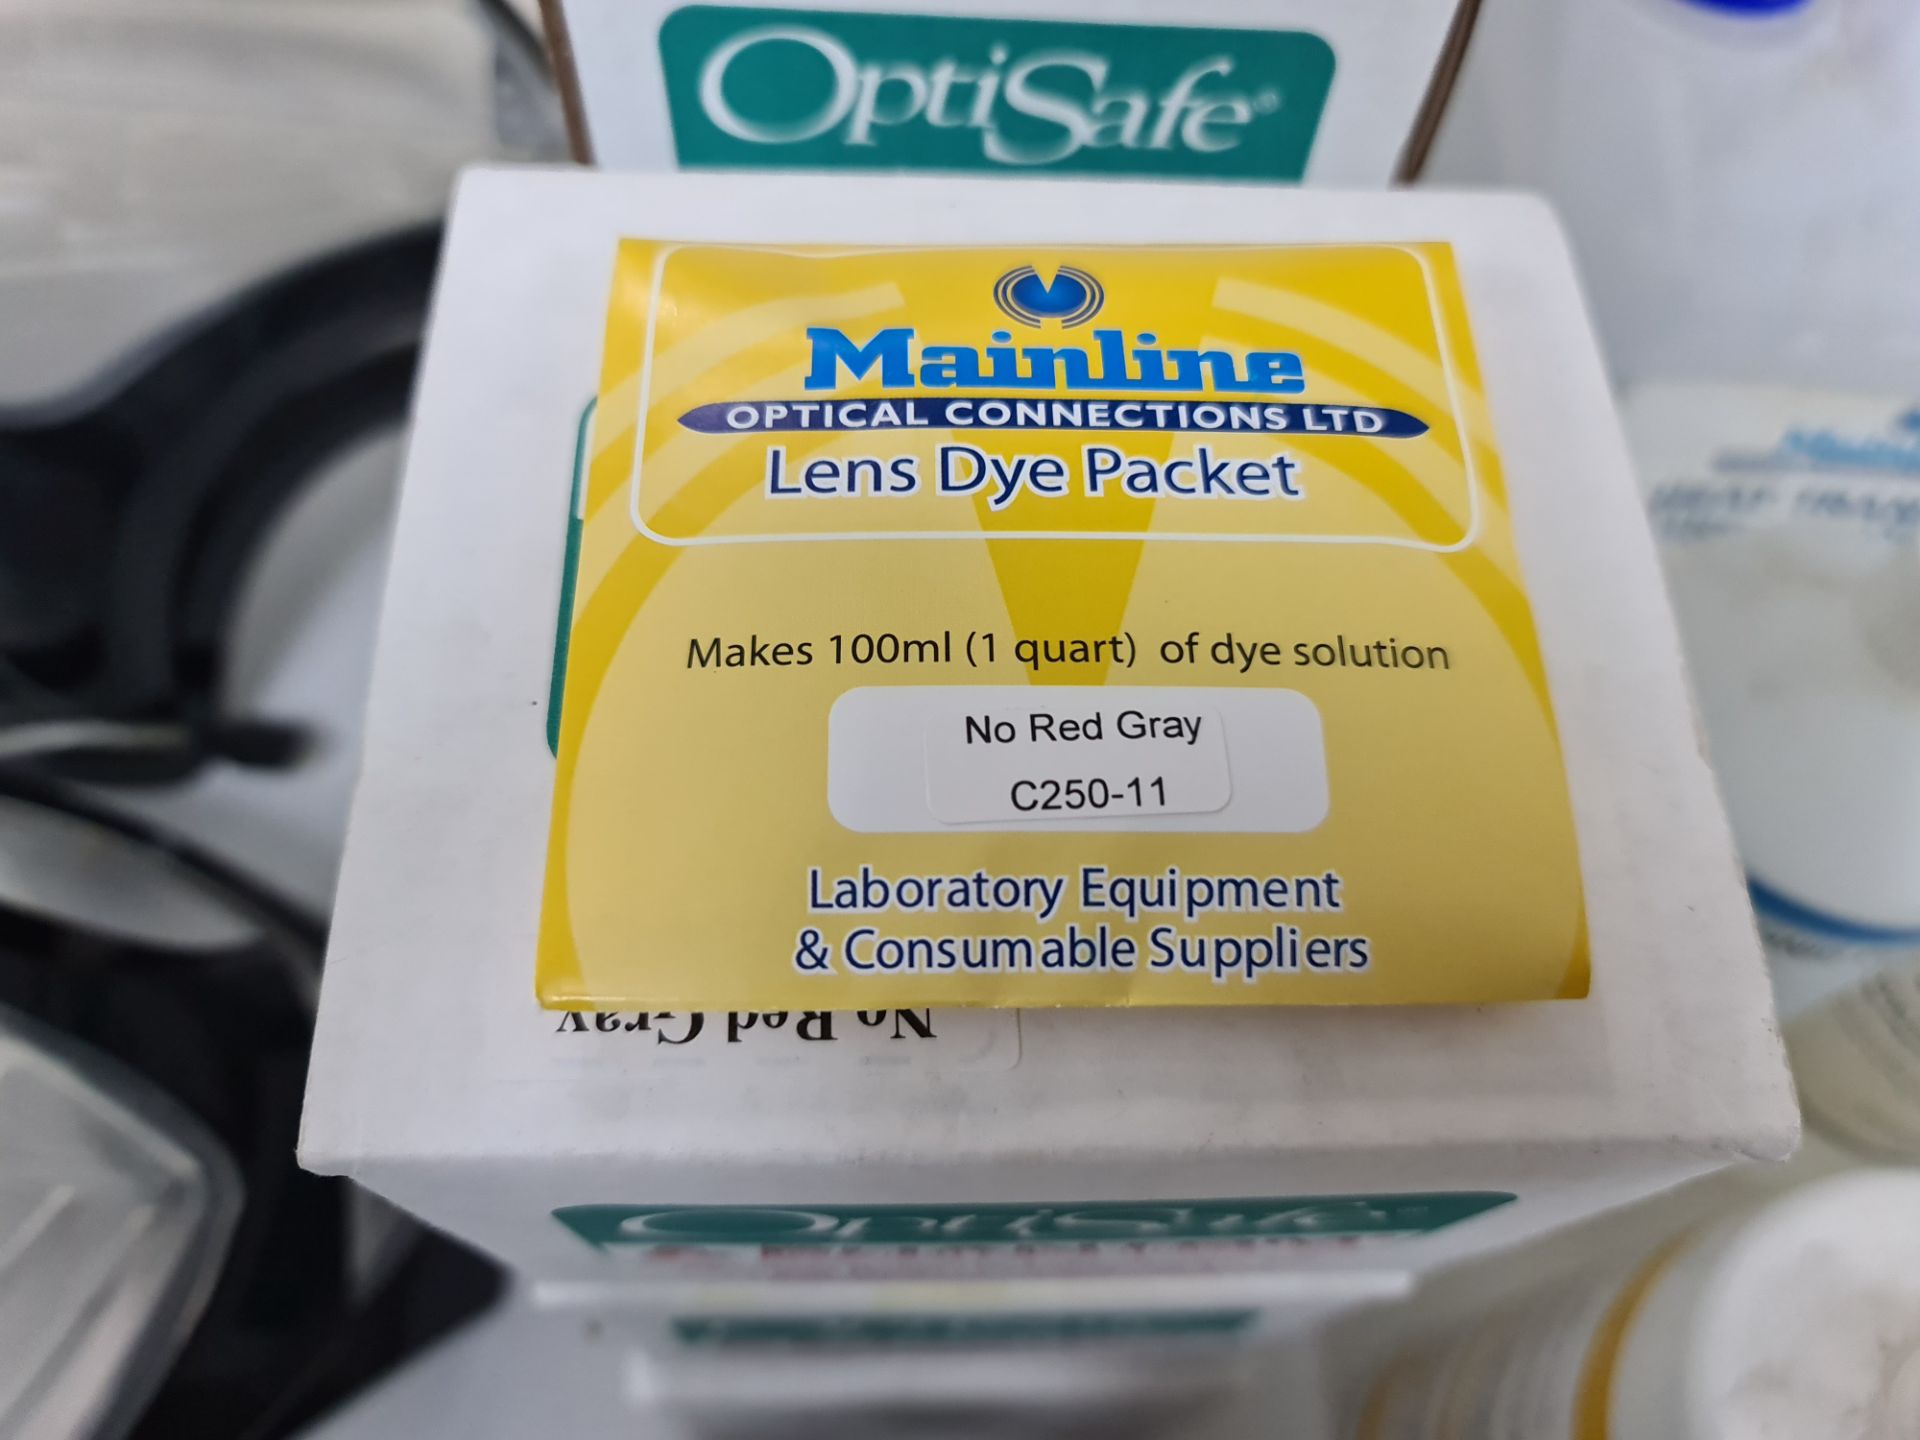 13 boxes of Phantom OptiSave lens dye NB. Some of the boxes appear not to be full - Image 4 of 4